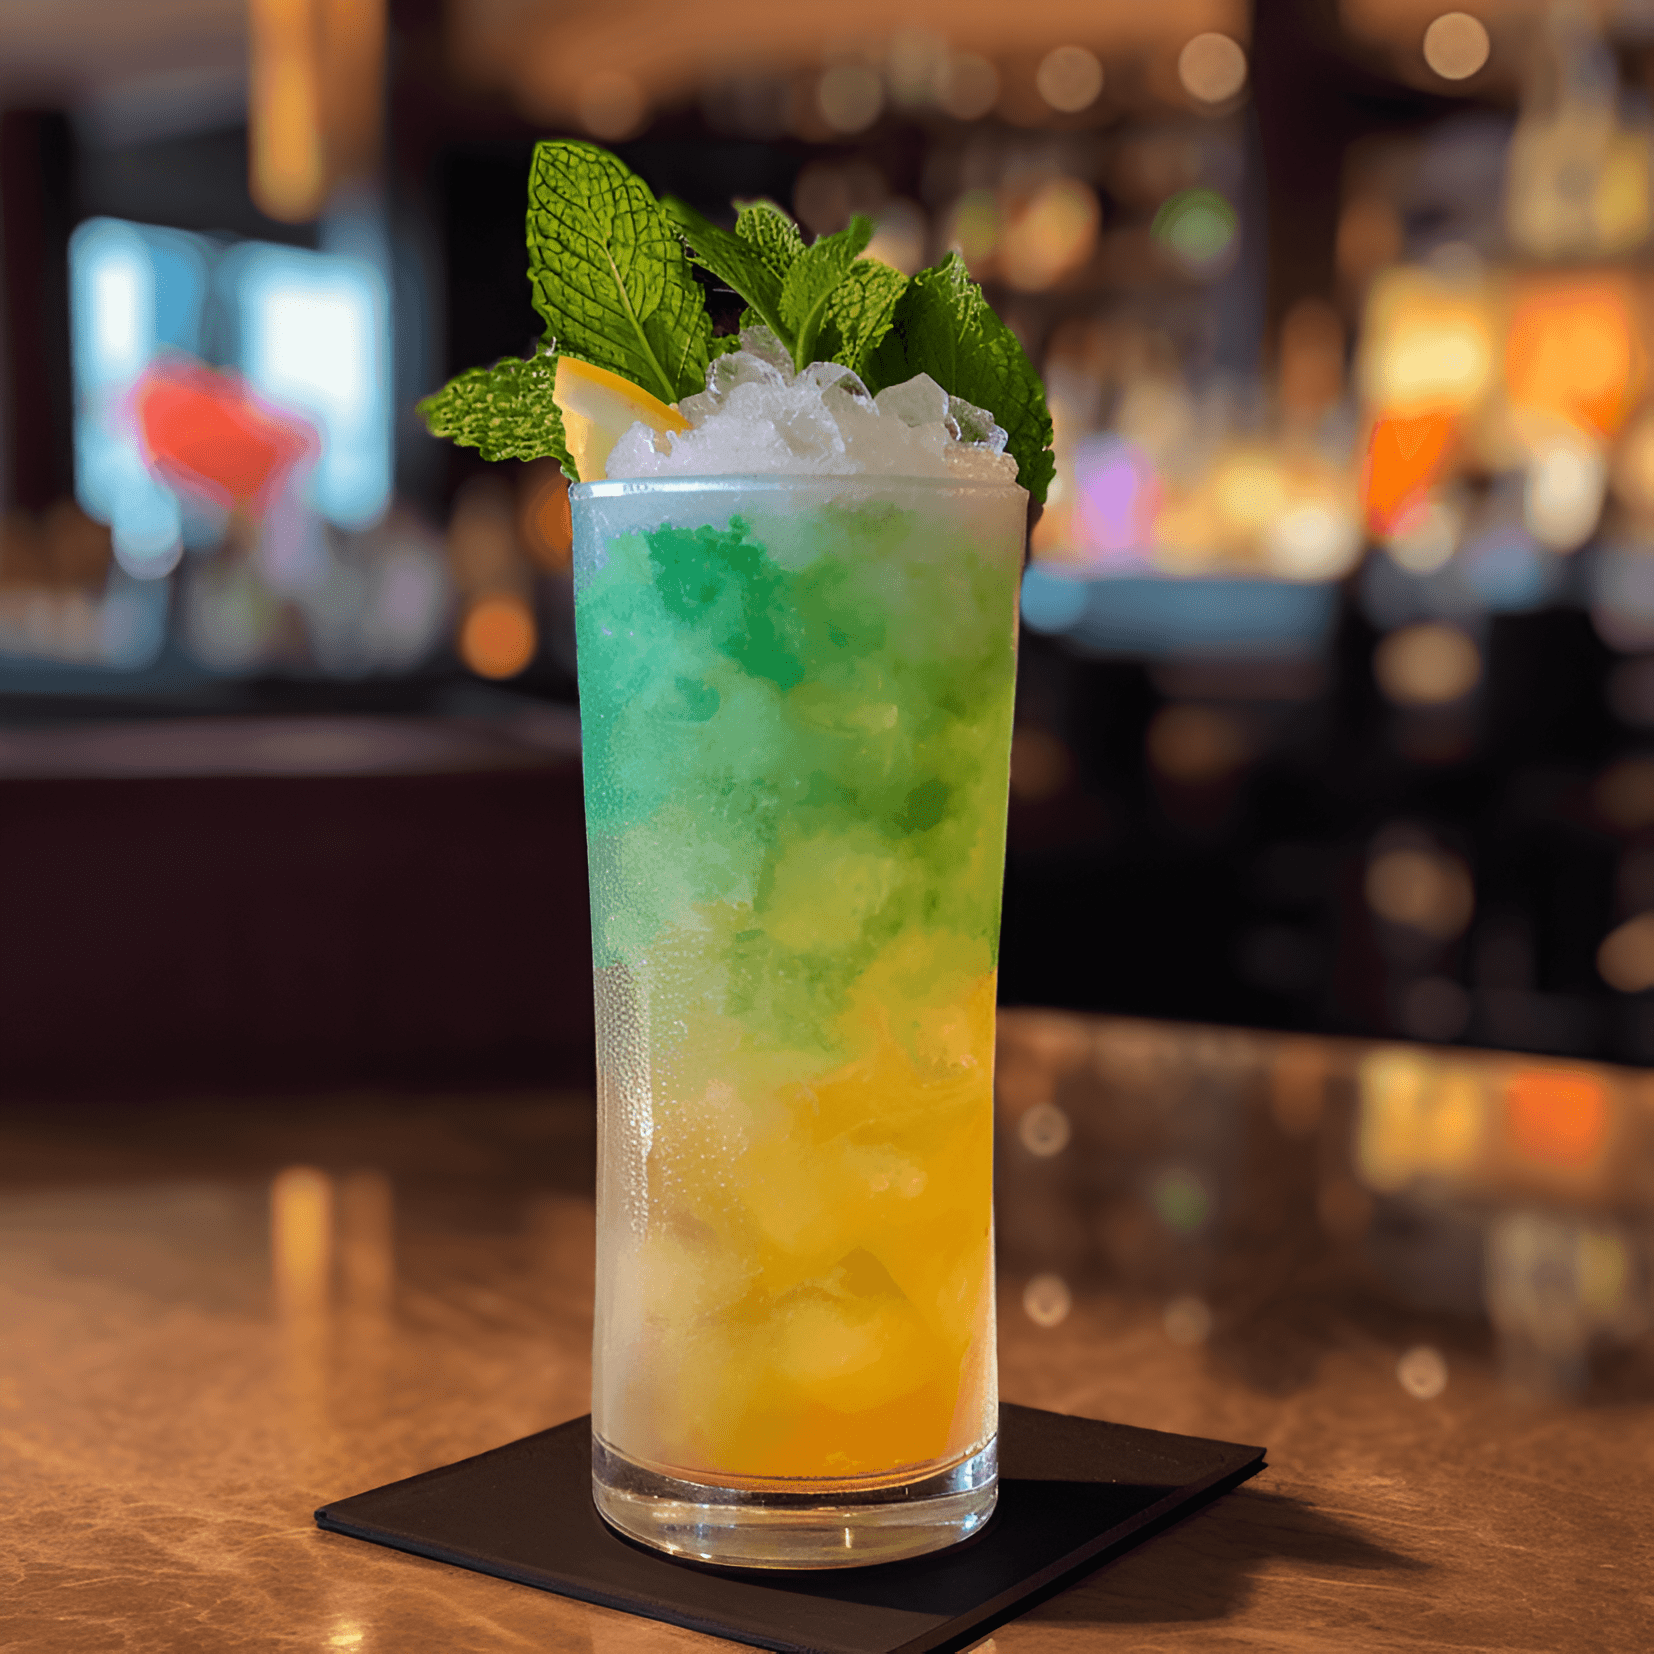 Royal Bermuda Cocktail Recipe - The Royal Bermuda Cocktail is a well-balanced, refreshing, and slightly sweet drink with a hint of tartness. The combination of rum, lime, and falernum creates a smooth and tropical flavor profile, while the bitters add a touch of complexity.